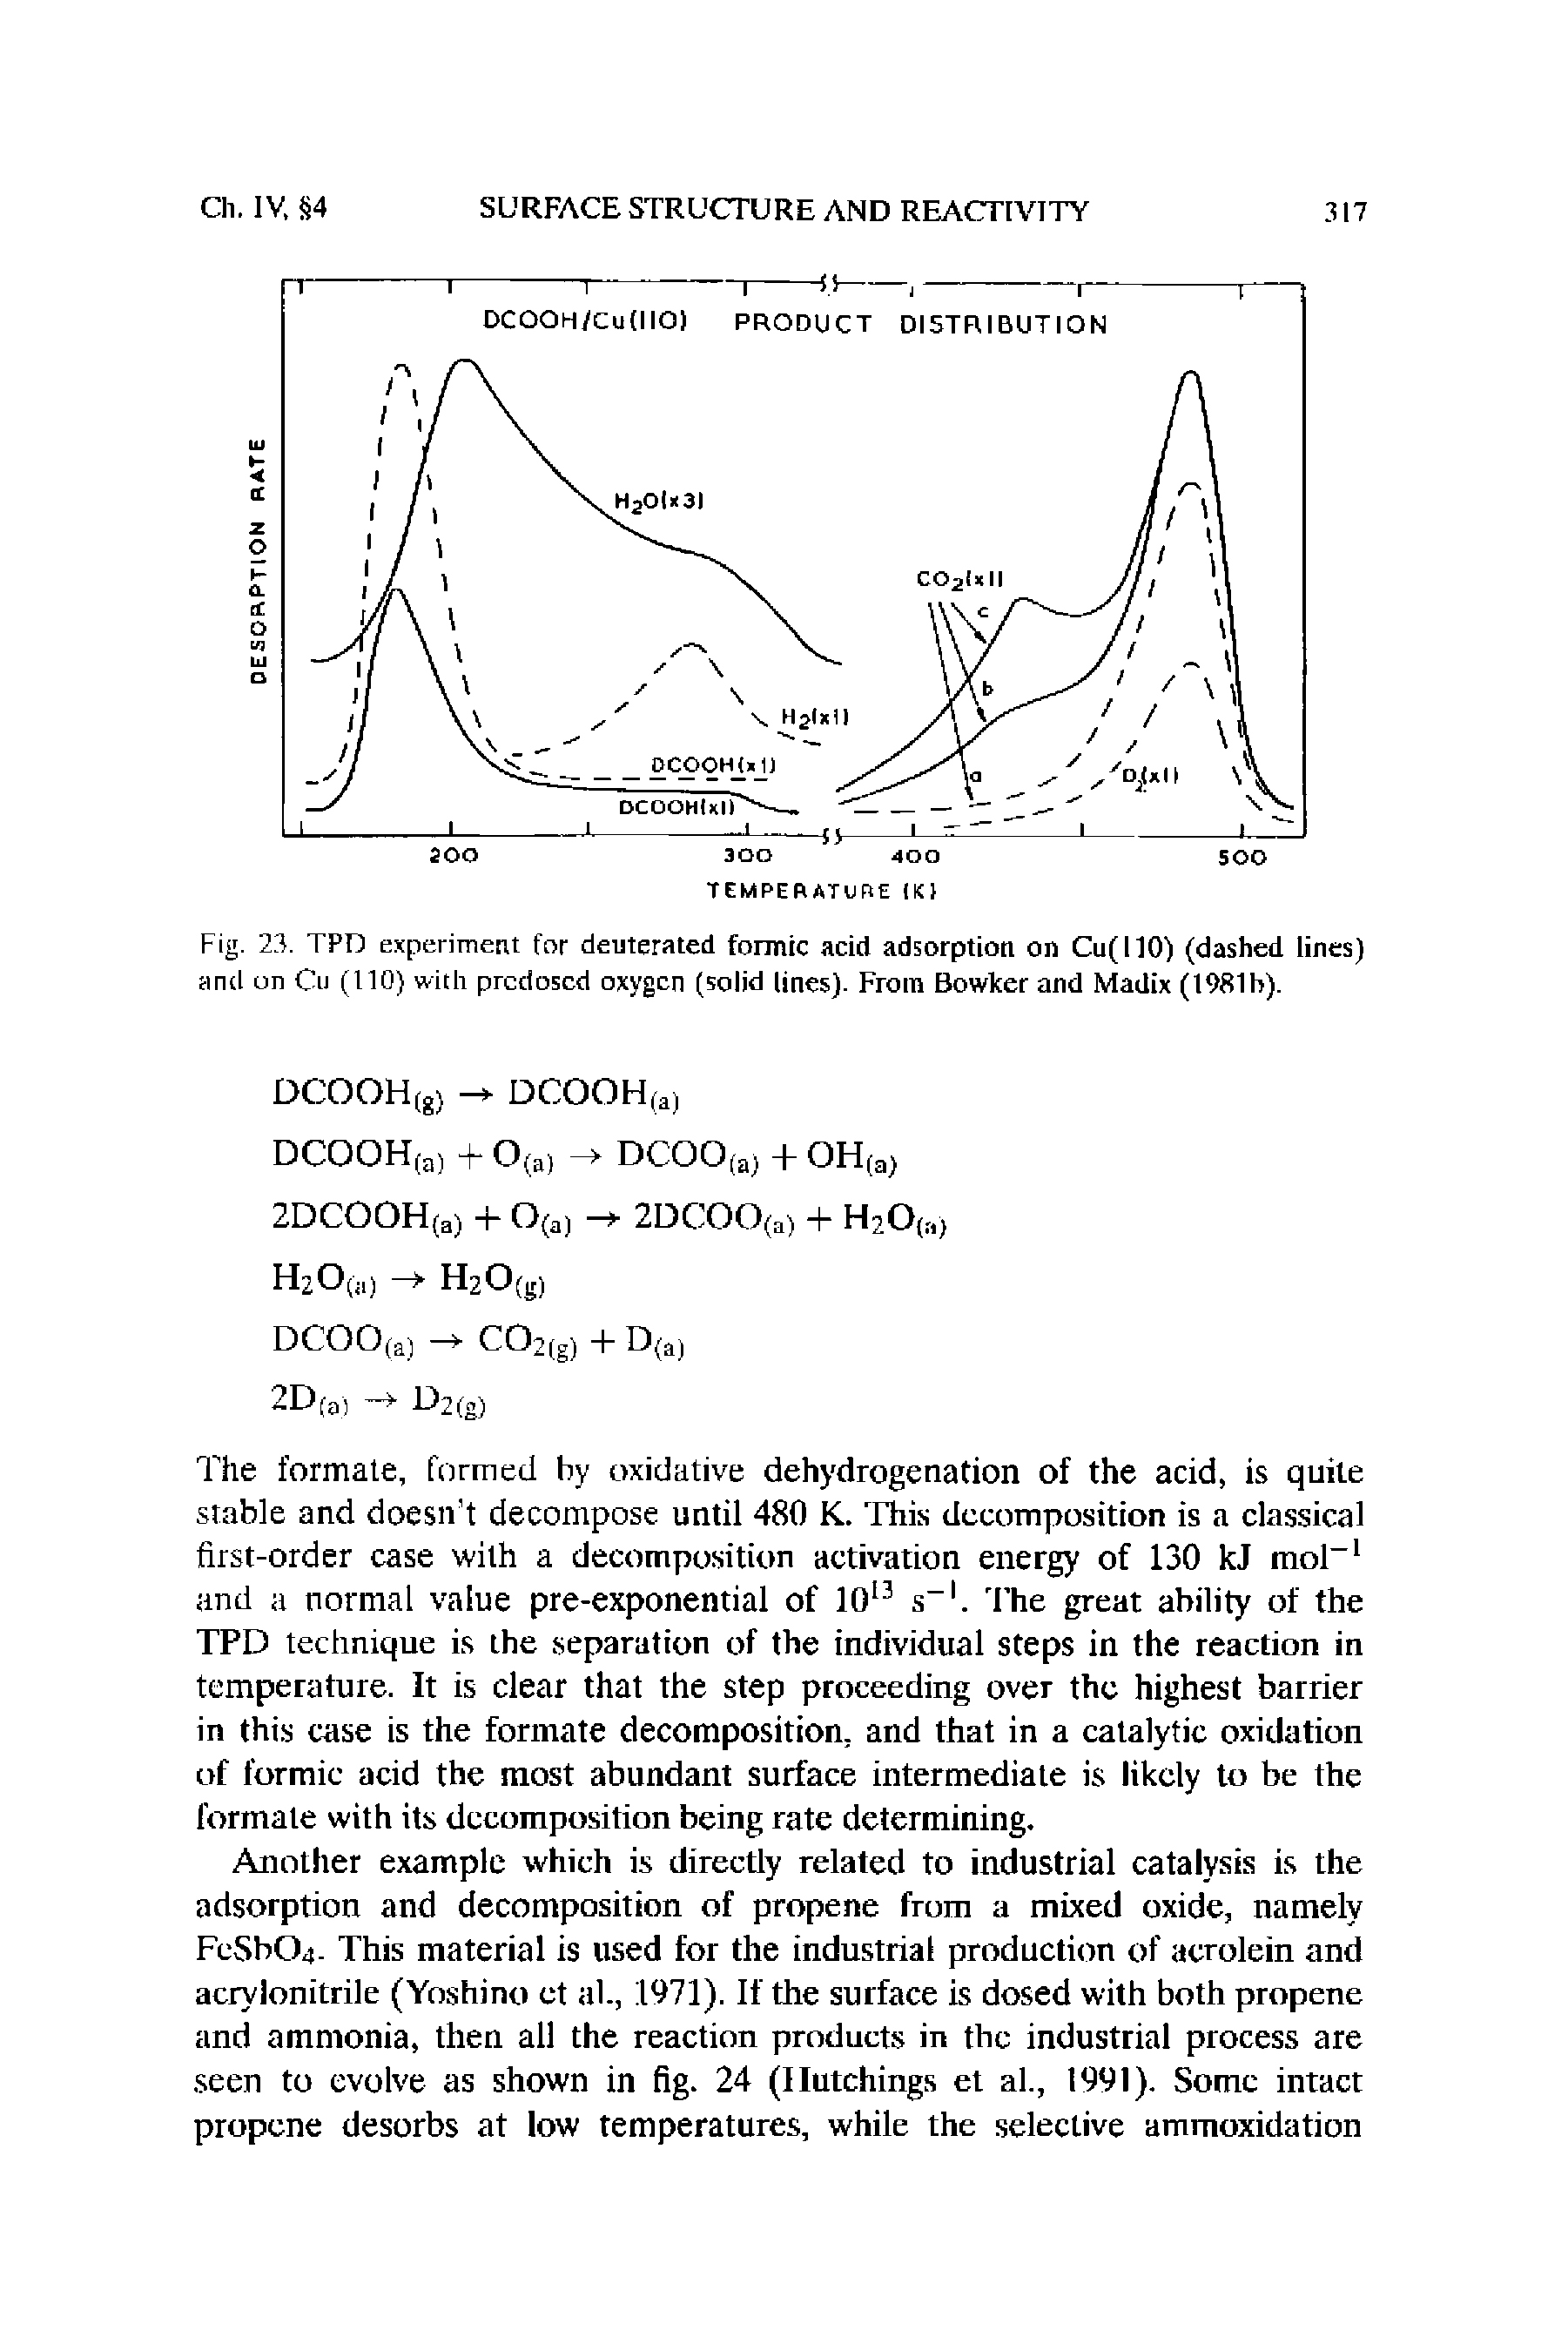 Fig. 23. TPD experiment for deuterated formic acid adsorption on Cu(l10) (dashed lines) anti on Cu (110) with prcdoscd oxygen (solid lines). From Bowker and Madix (1981b).